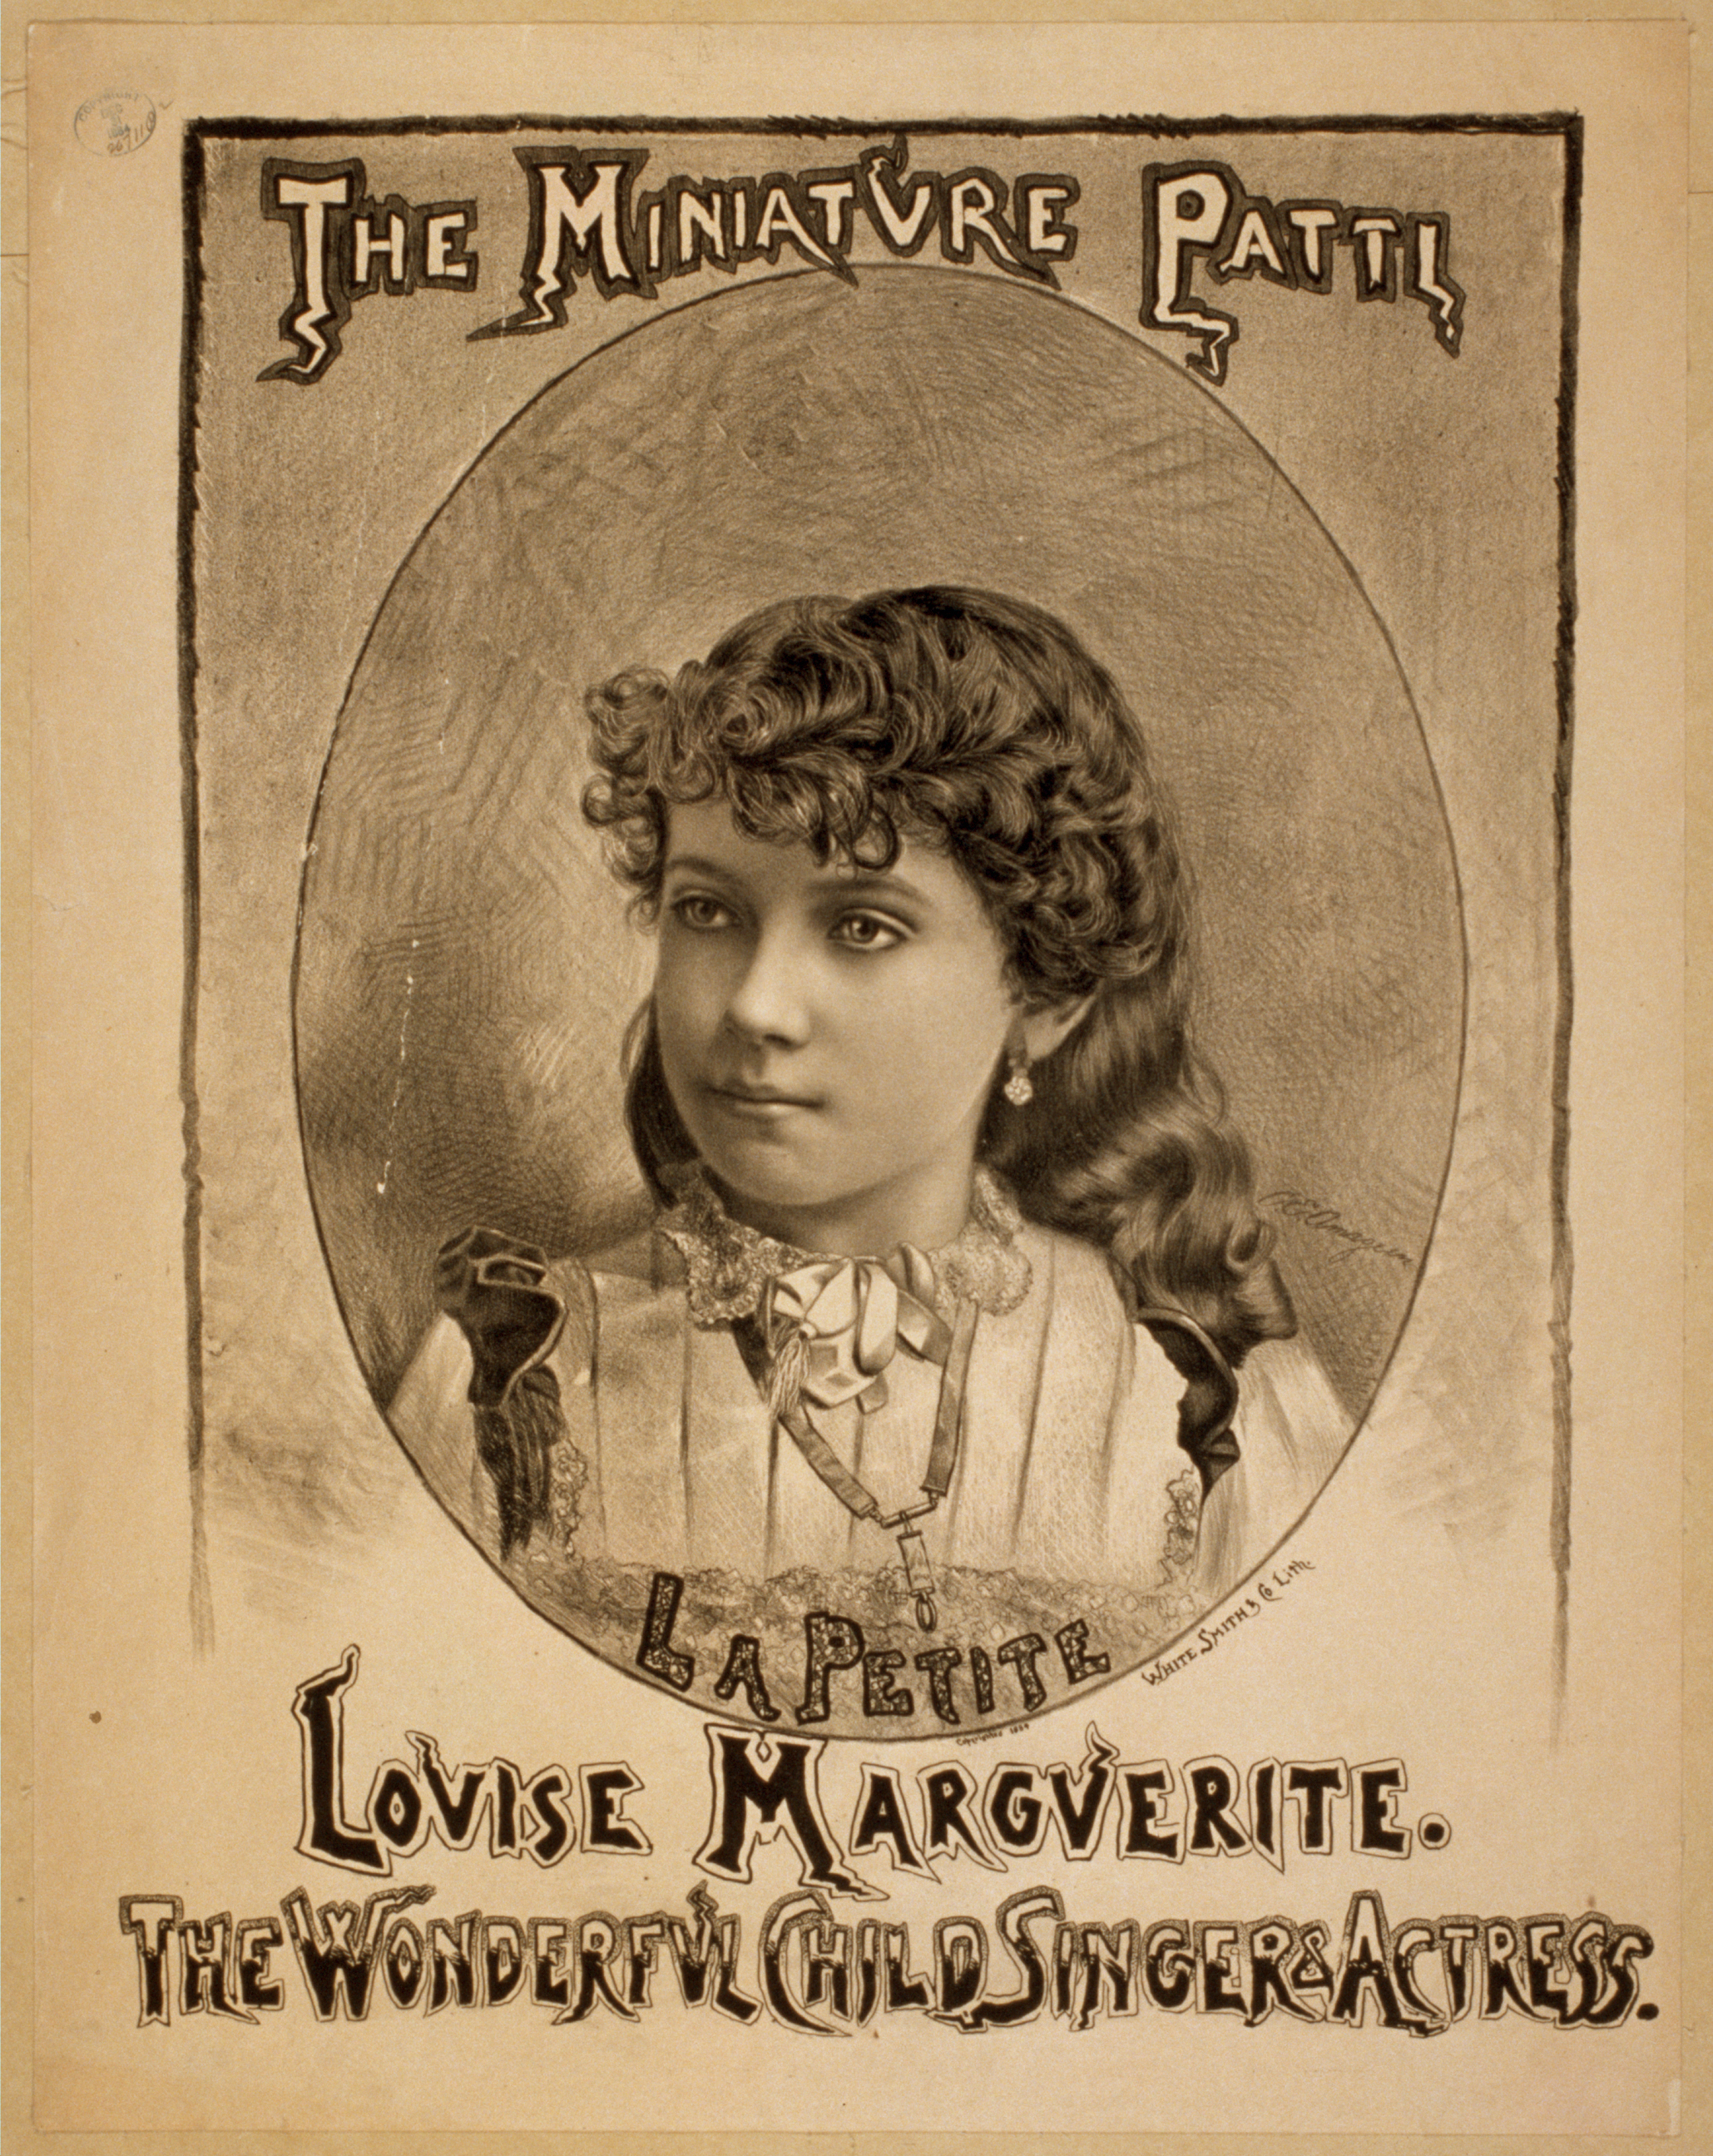 photos-of-louise-henry-actress